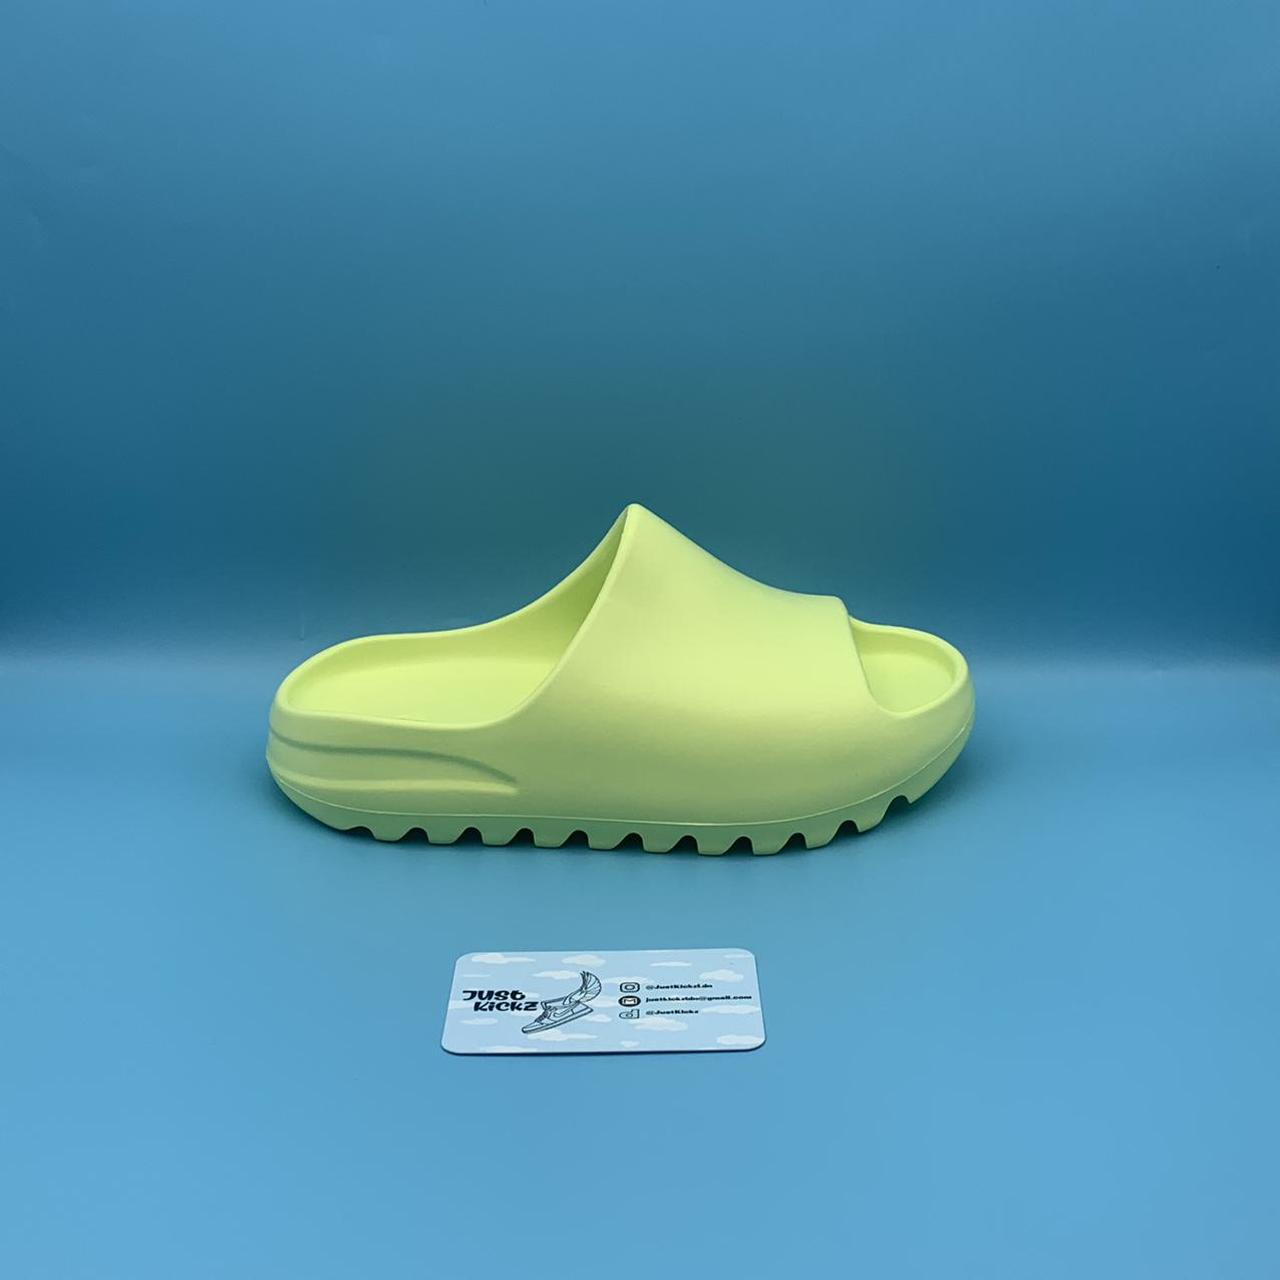 Product Image 1 - Yeezy Slide ‘Glow Green’

Condition: Brand